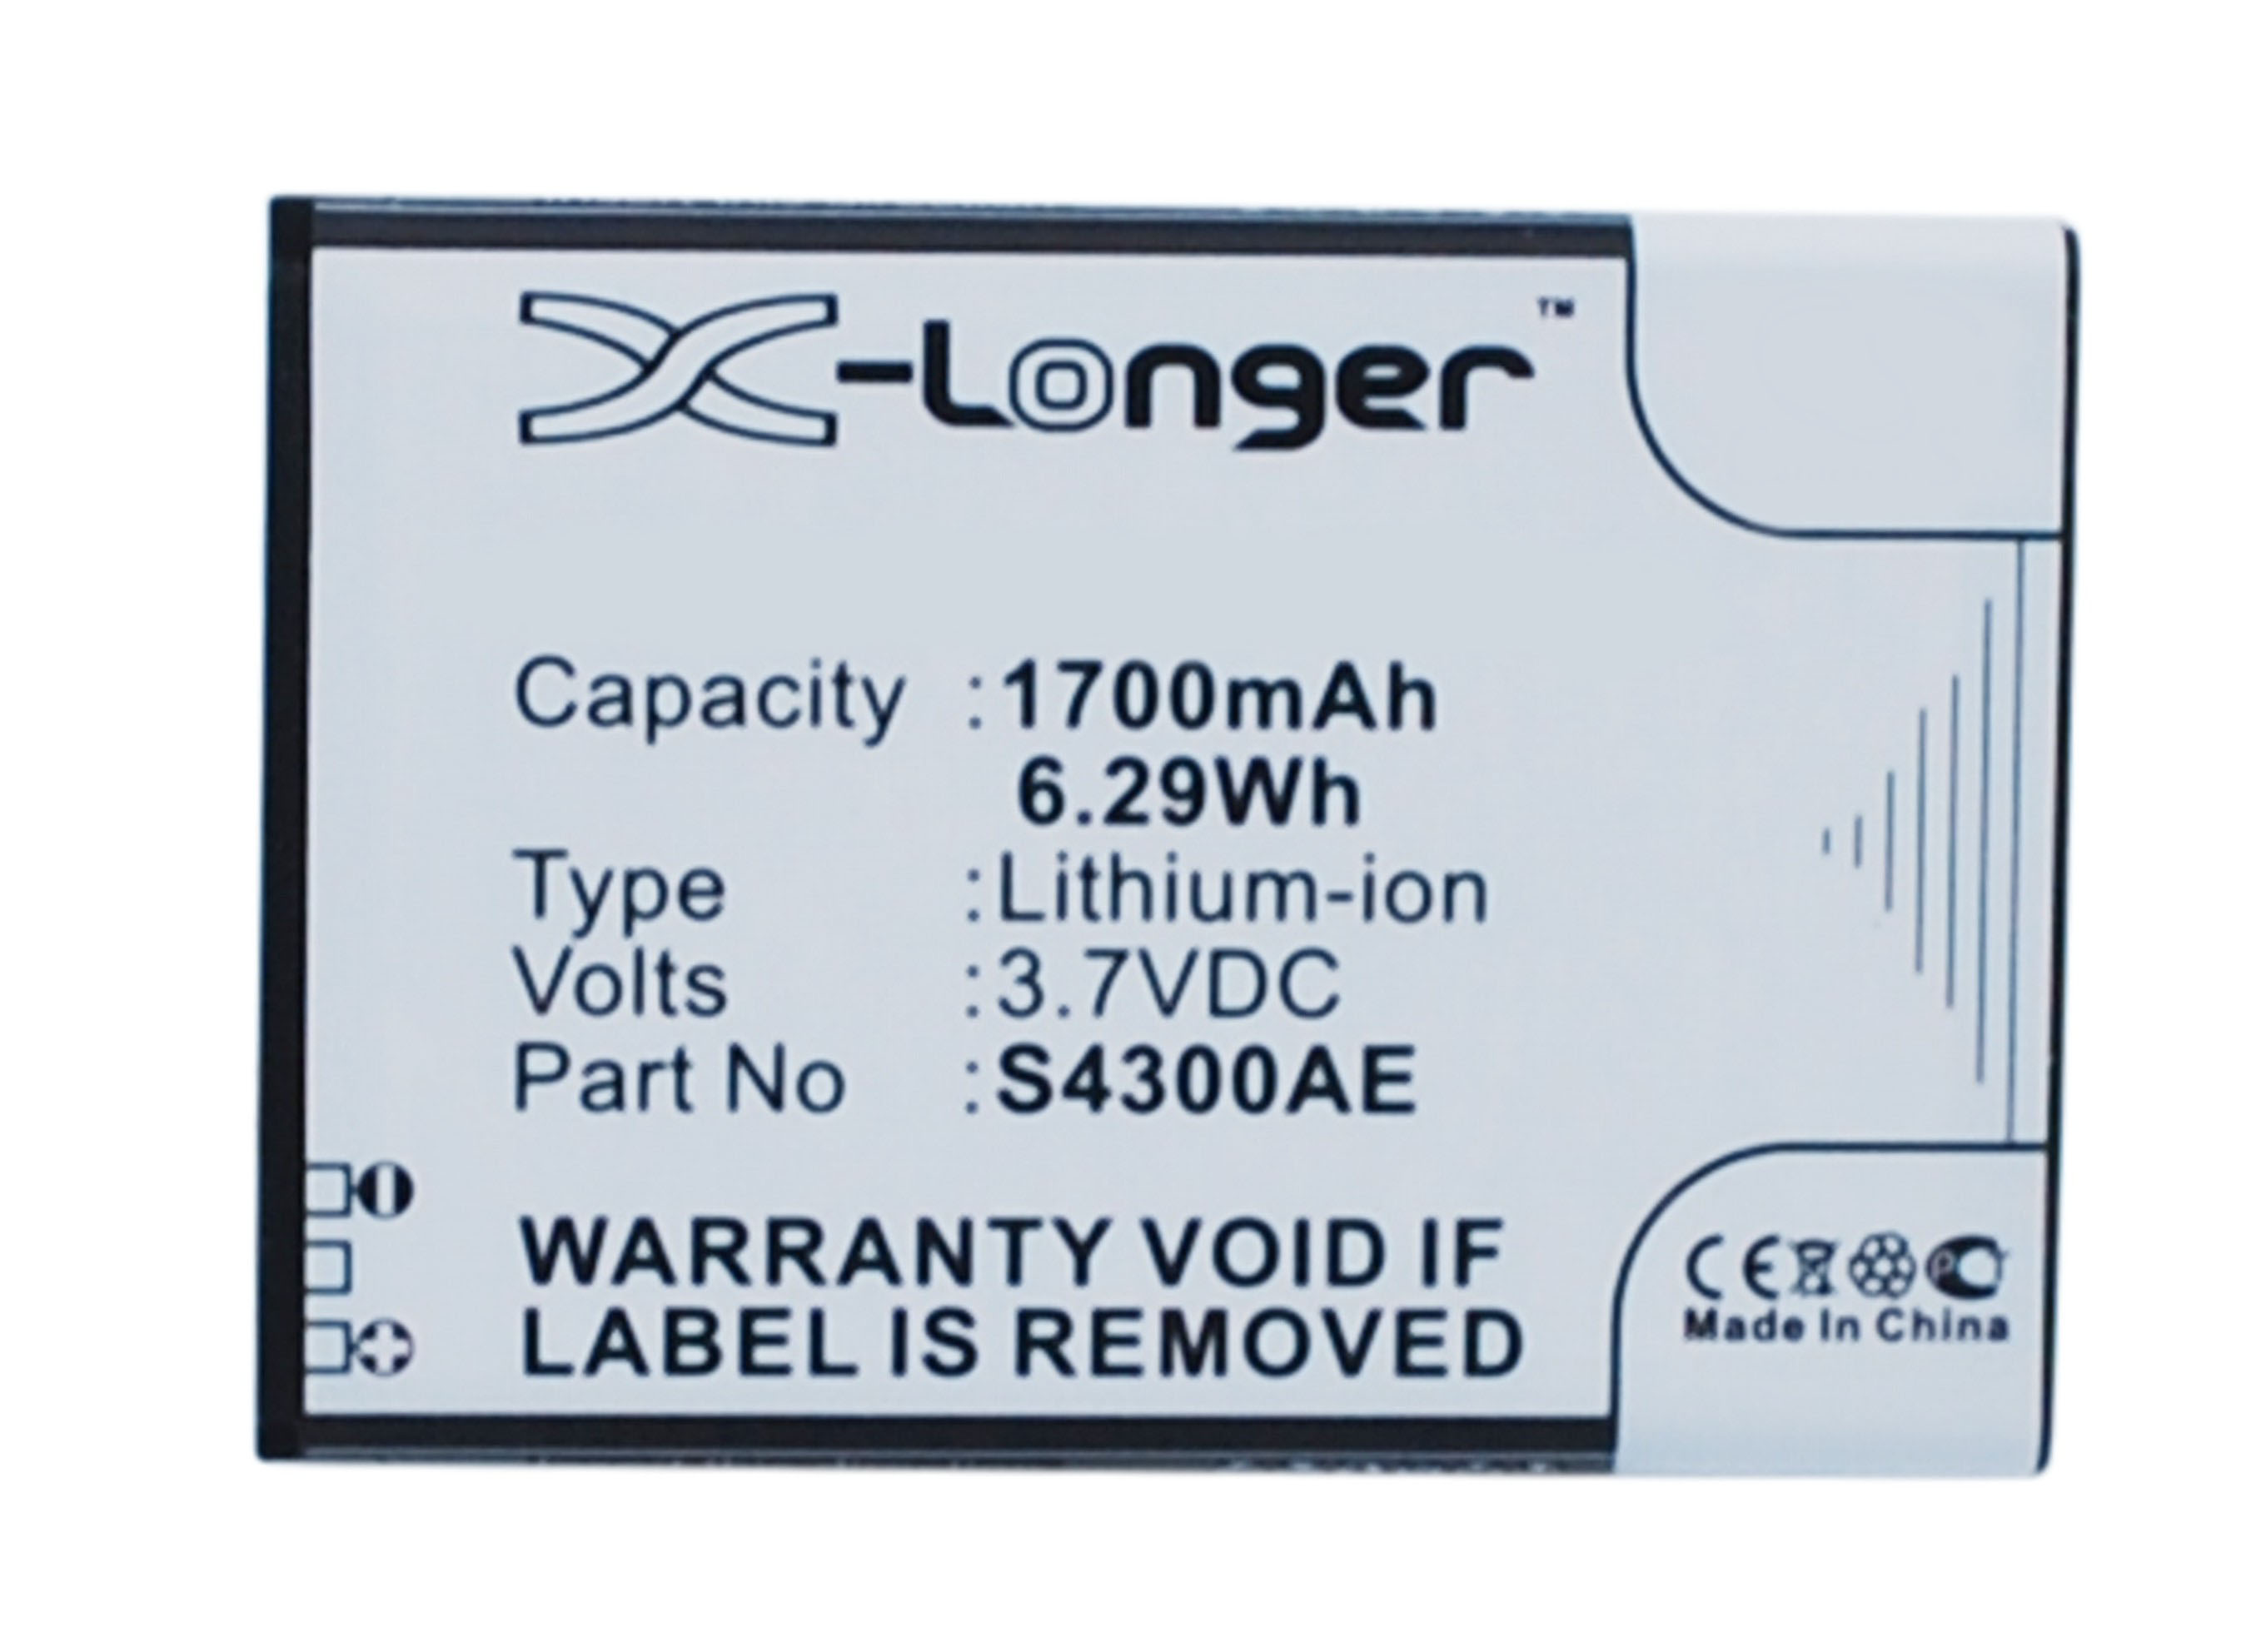 Synergy Digital Battery Compatible With Wiko S4300AE Cellphone Battery - (Li-Ion, 3.7V, 1700 mAh / 6.29Wh)